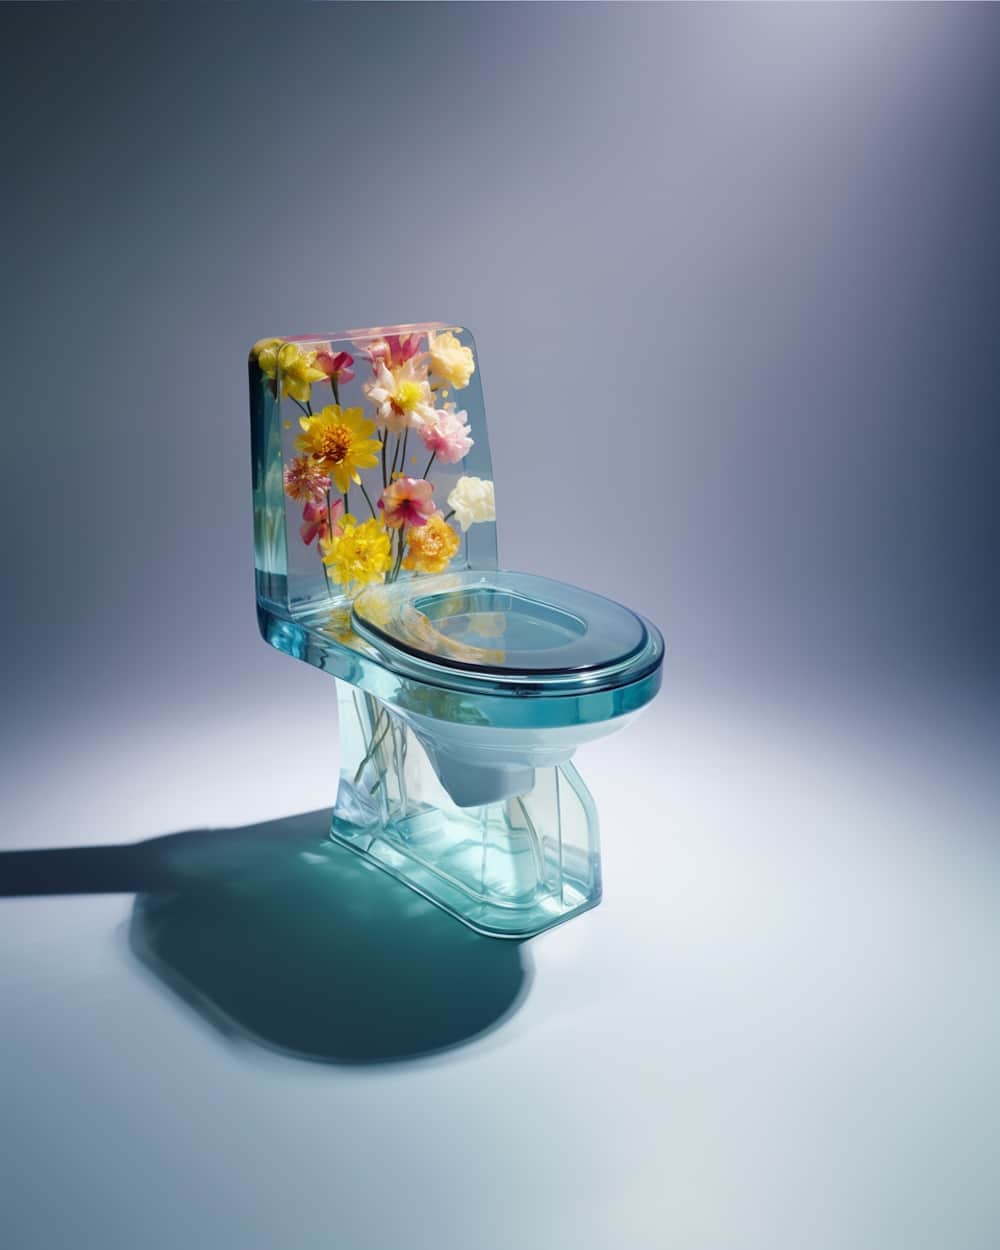 AI generated image of a glass toilet